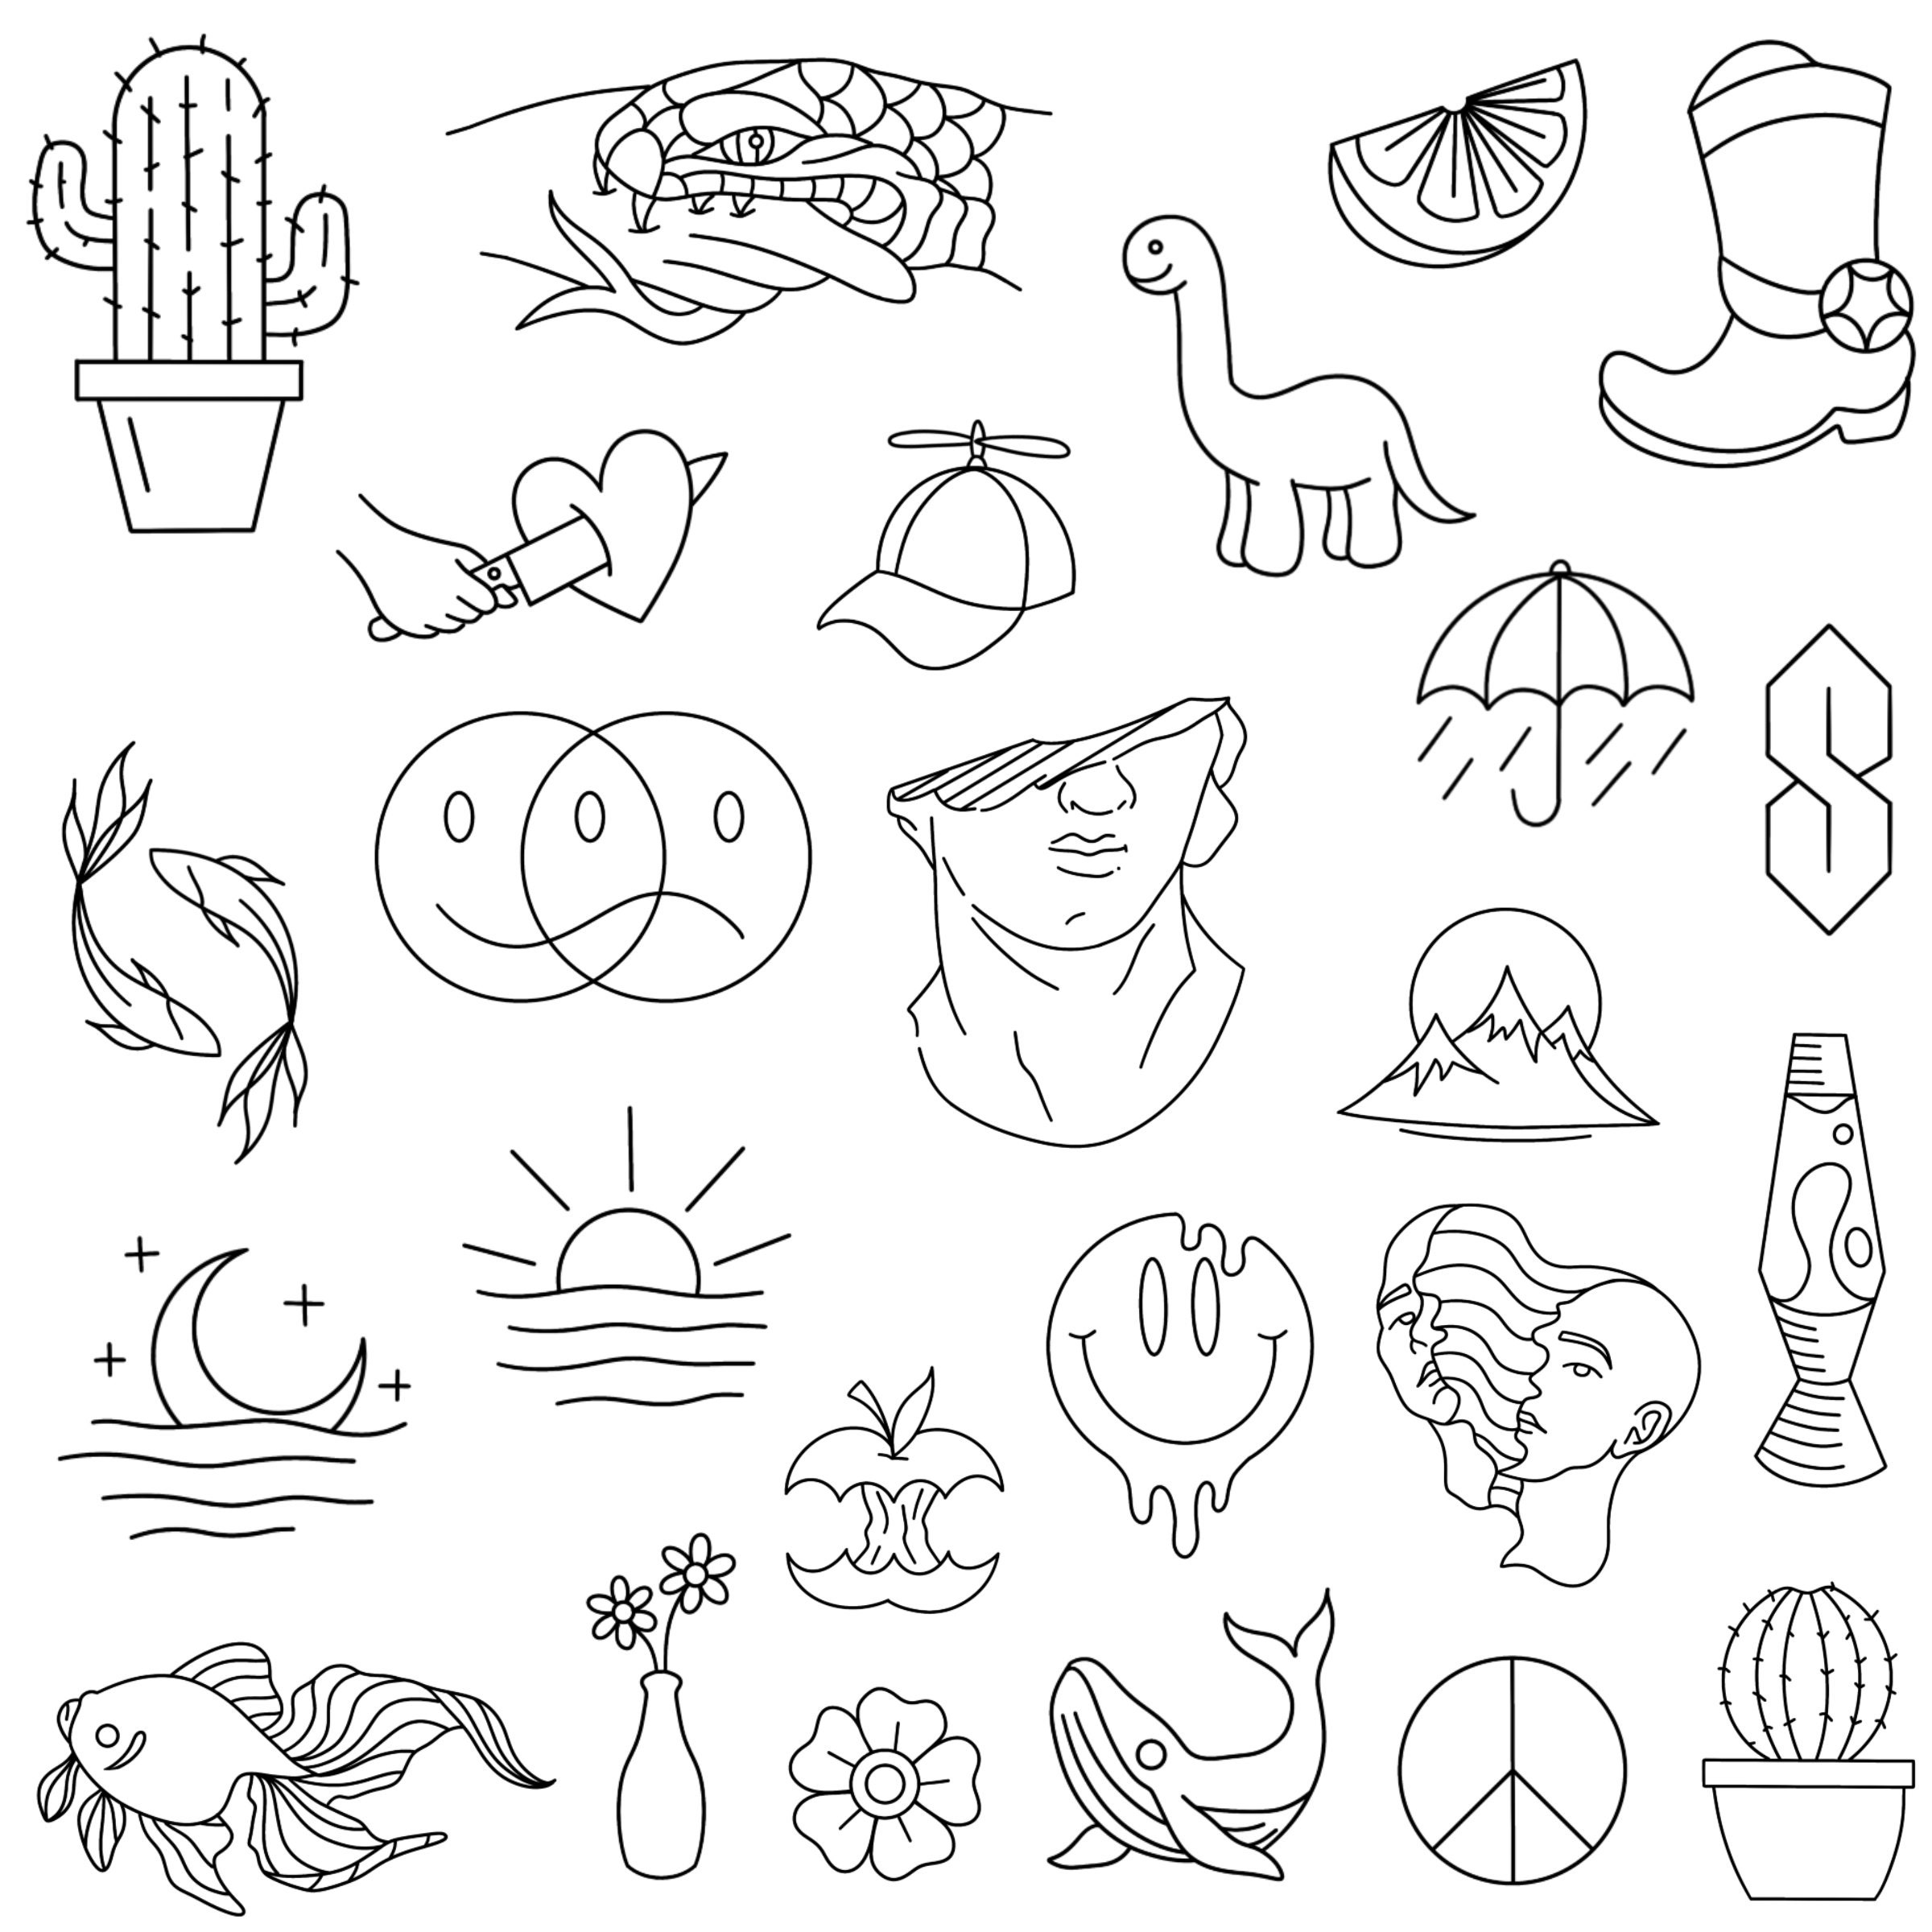 Temporary Tattoo Stencils Booklet #1 With 100 Different Designs